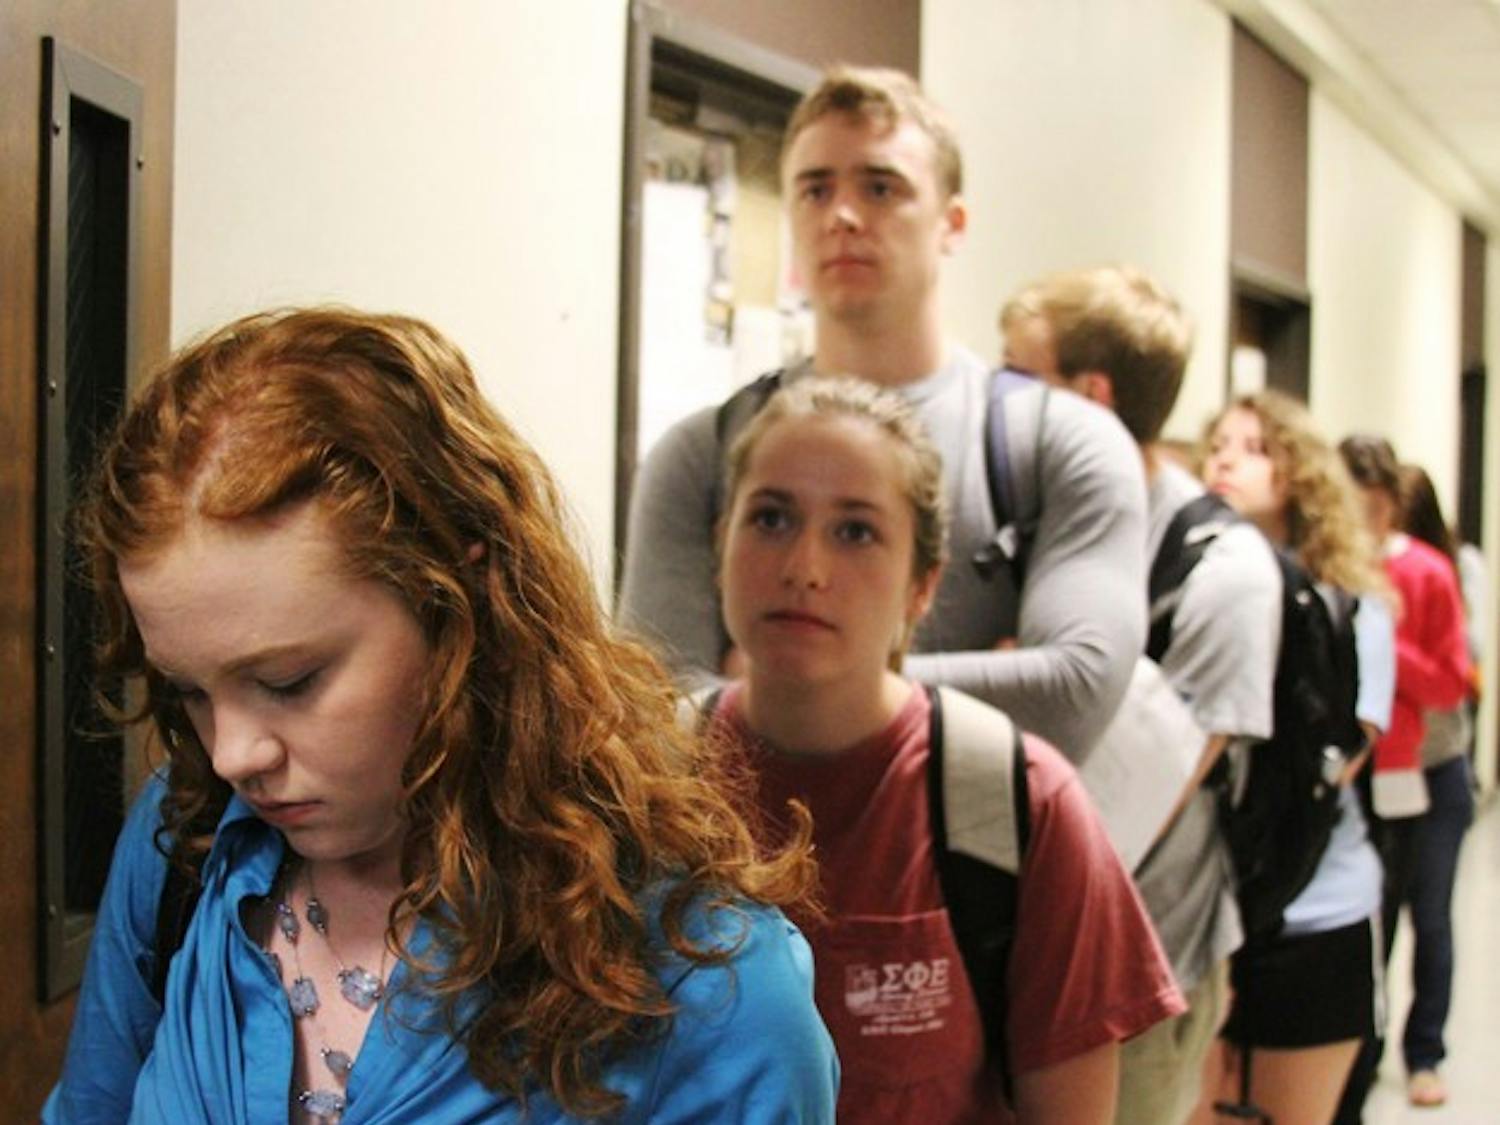 Photo: History majors line up as early as 5:15 a.m. to enroll in special topics seminars (Leda Strong)